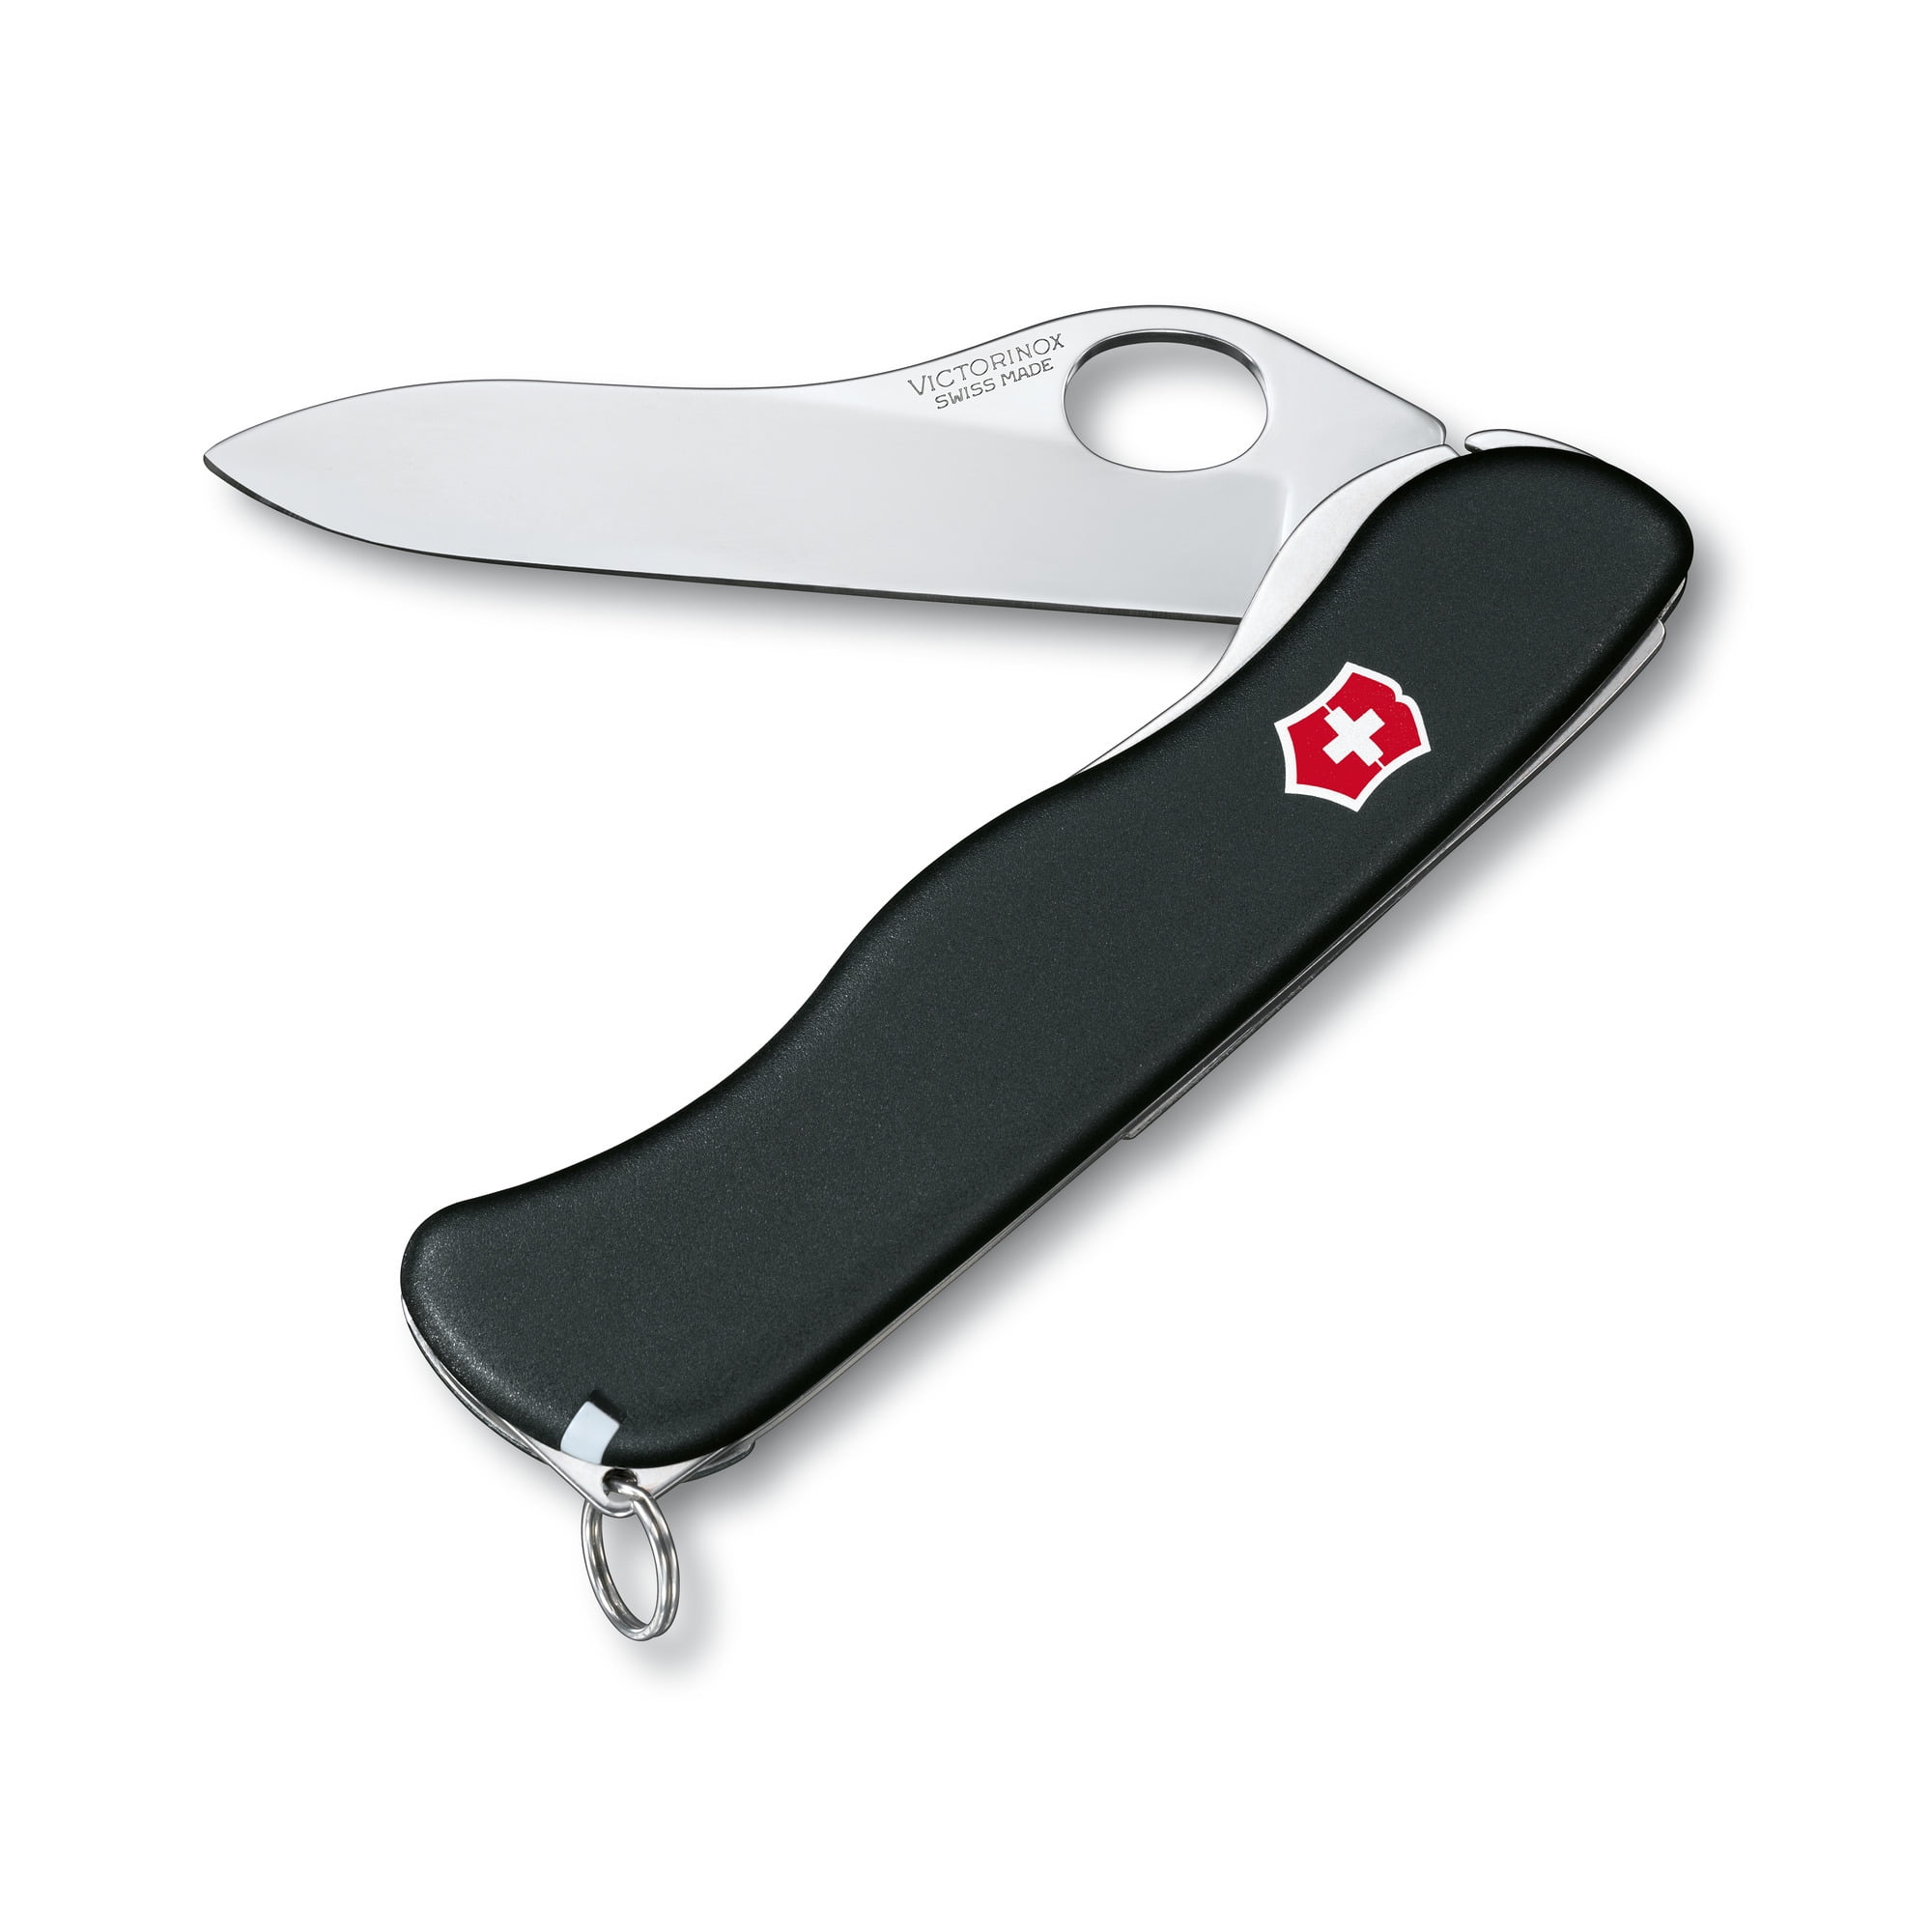  Victorinox Pioneer Alox Swiss Army Knife, 8 Function Swiss Made Pocket  Knife with Reamer, Key Ring, Can Opener and Large Blade - Black :  Everything Else